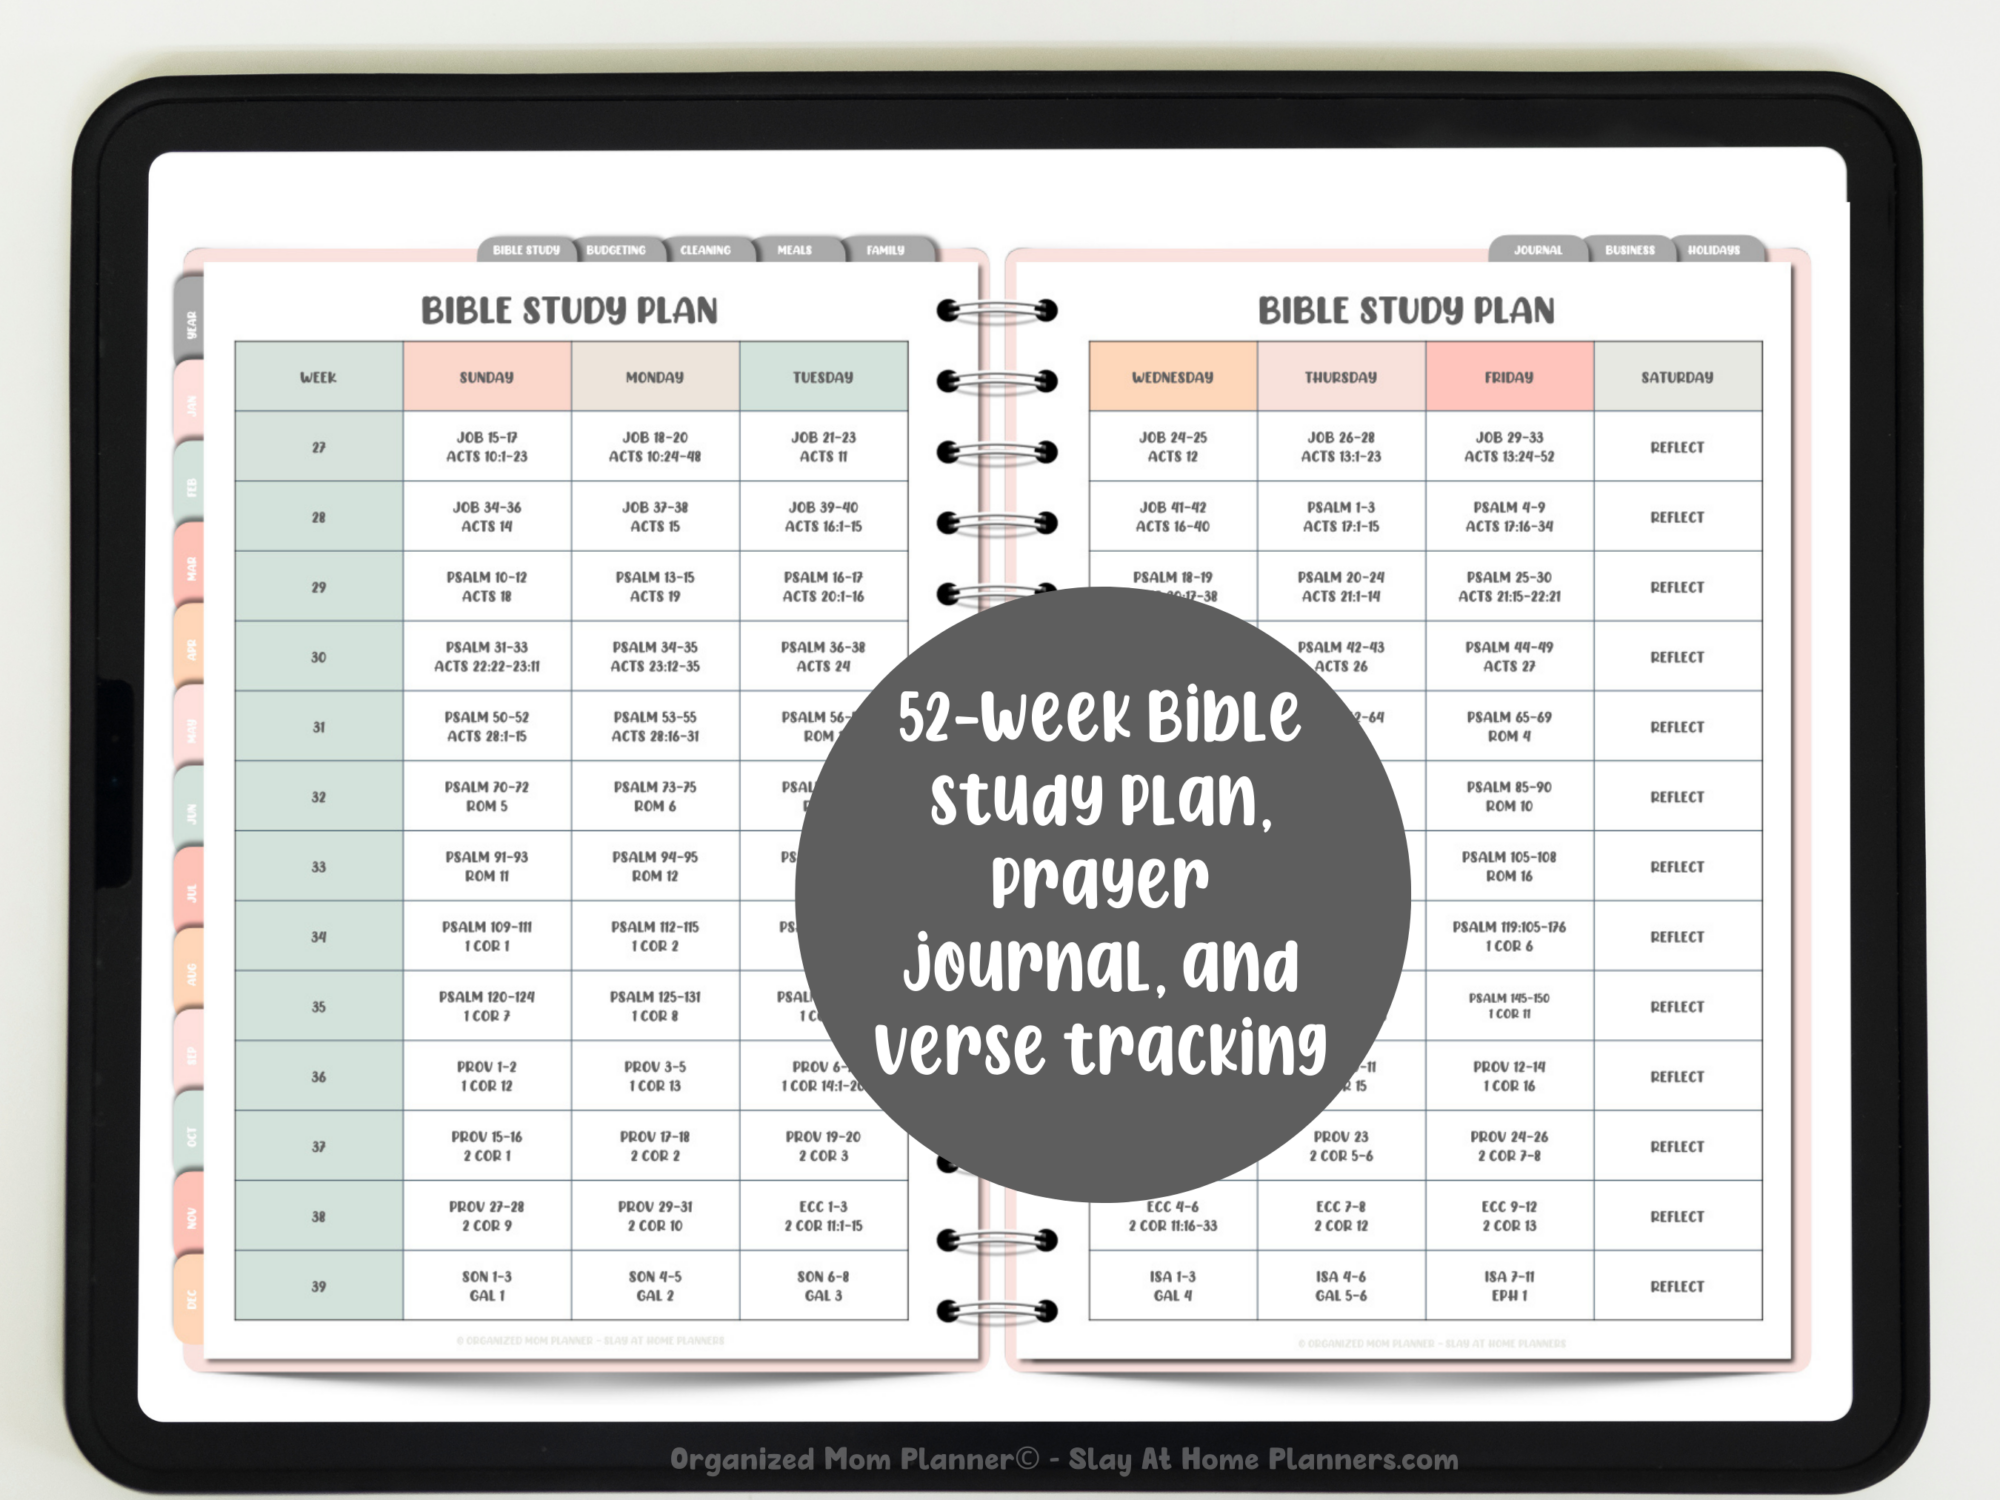 undated bible study plan overview